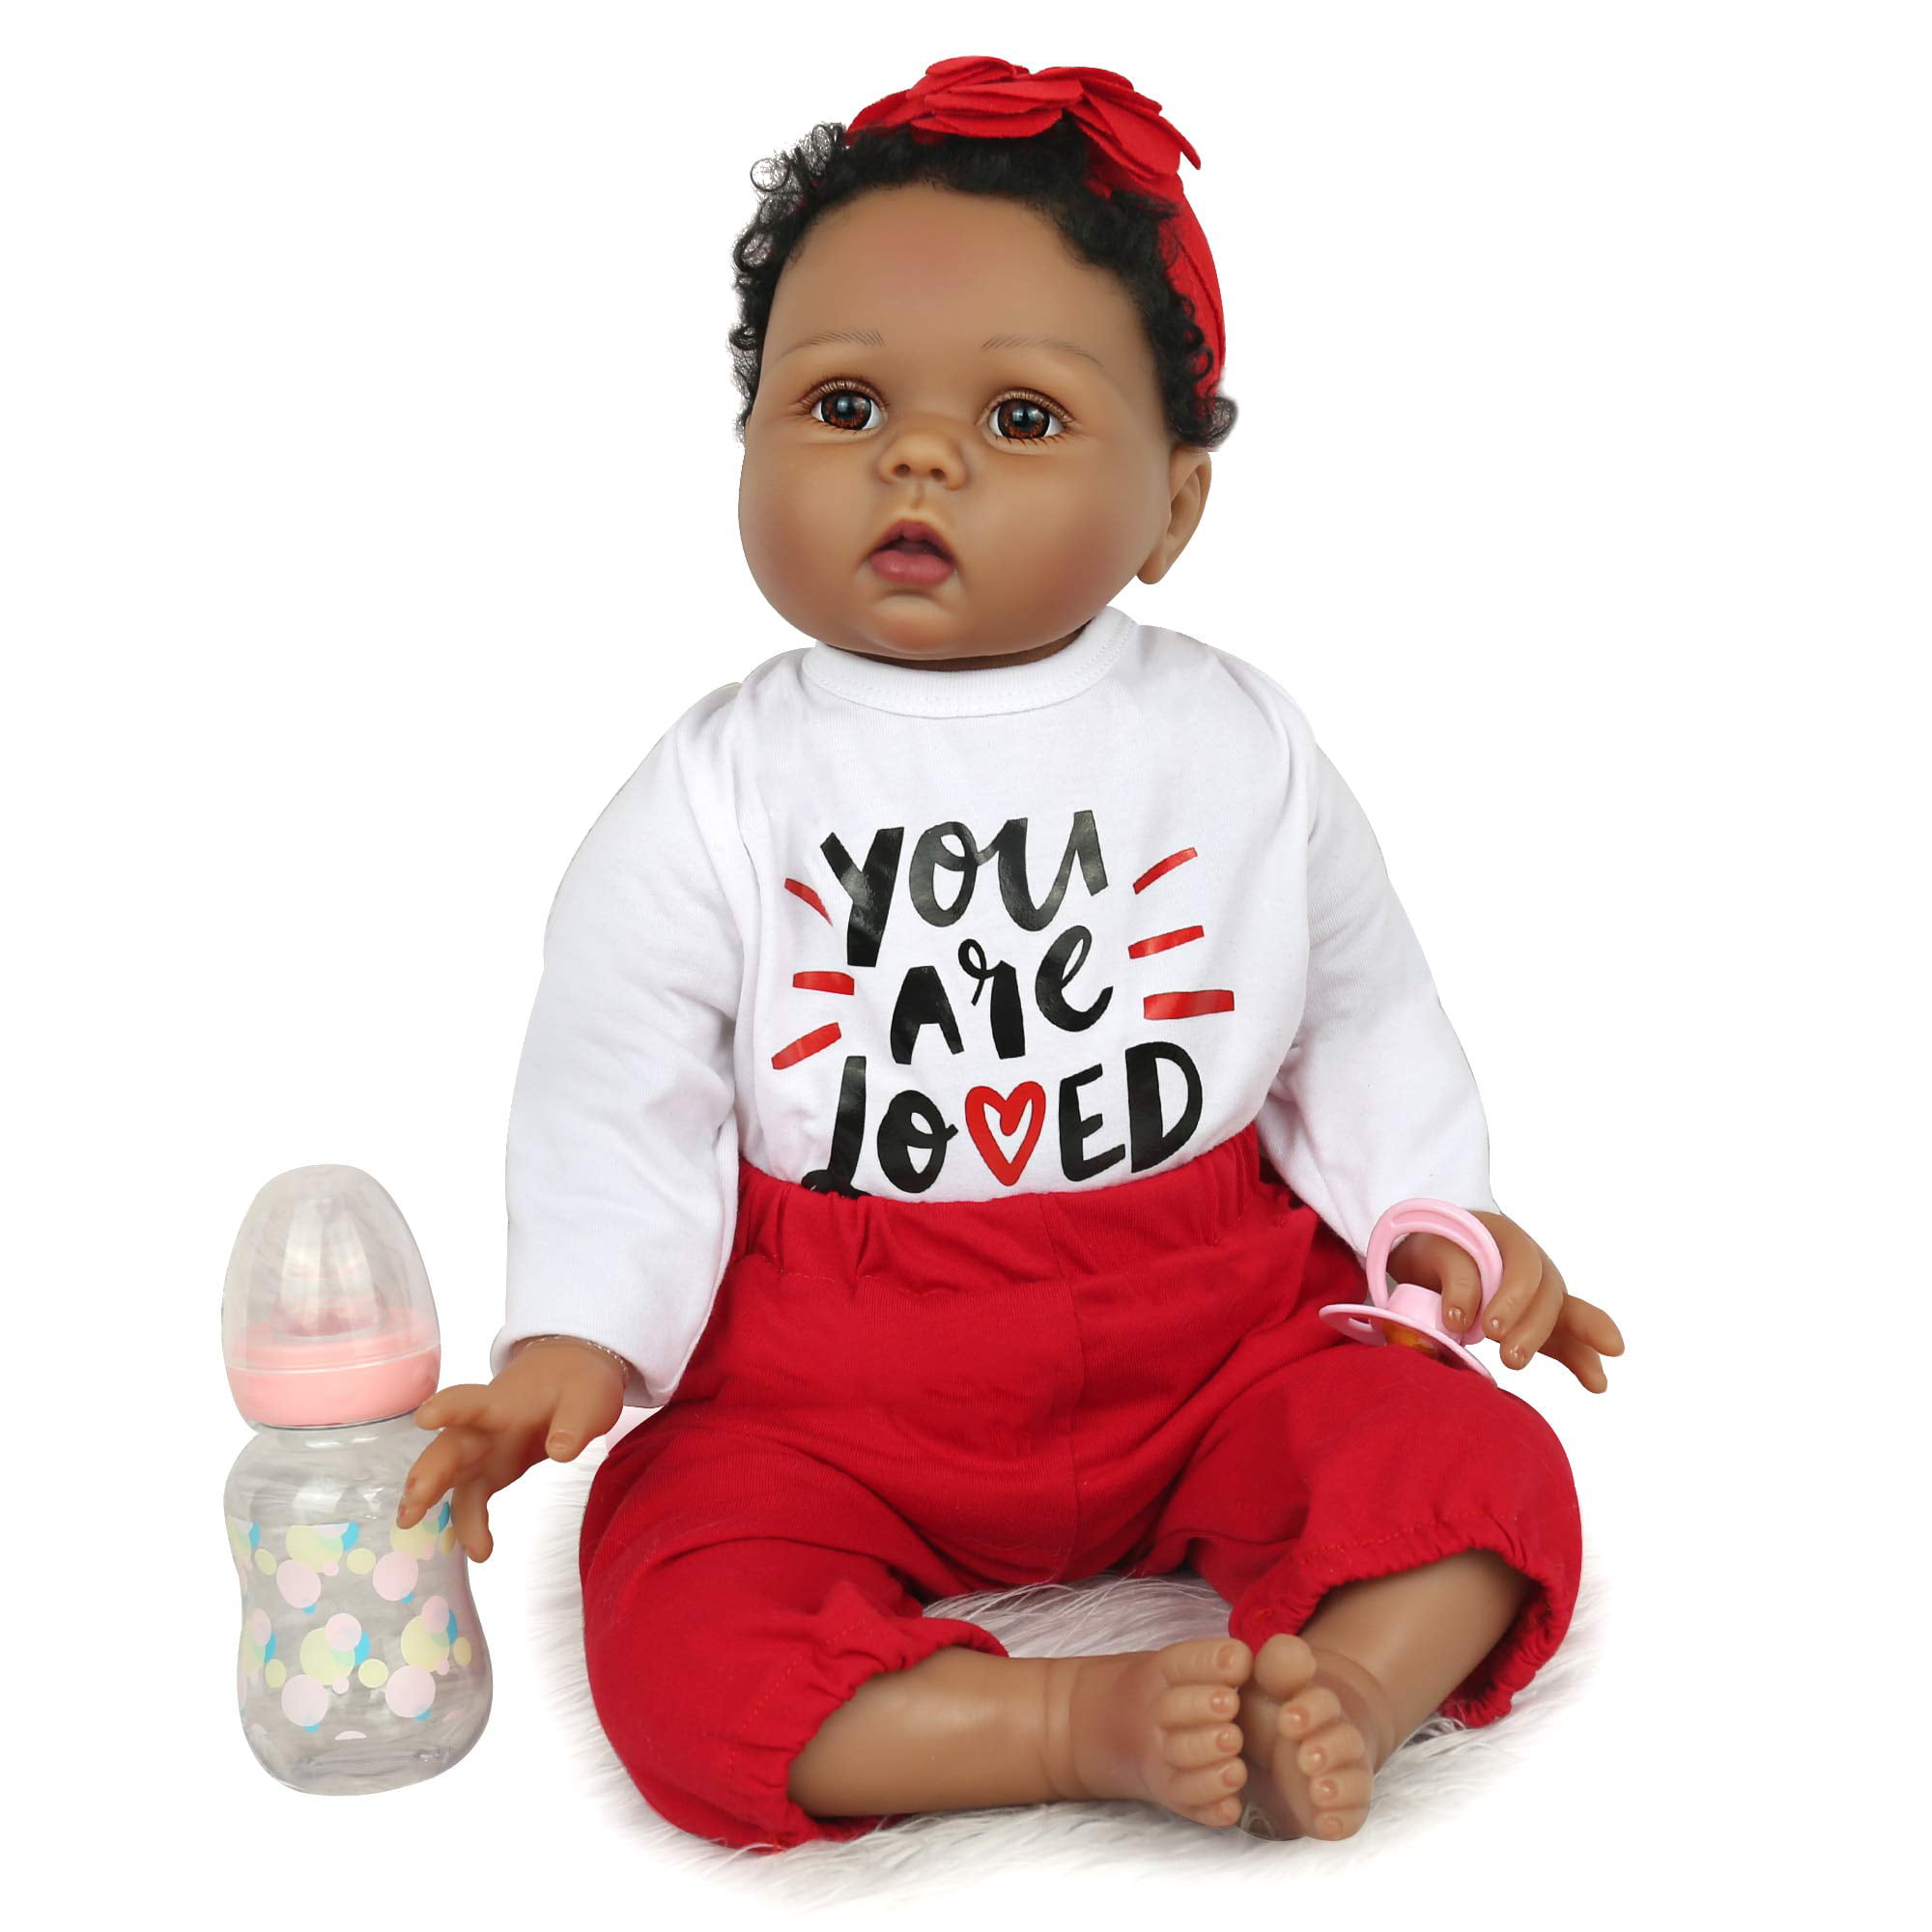 African American Realistic Girl Baby Doll Black Hair Reborn Infant Weighted New 